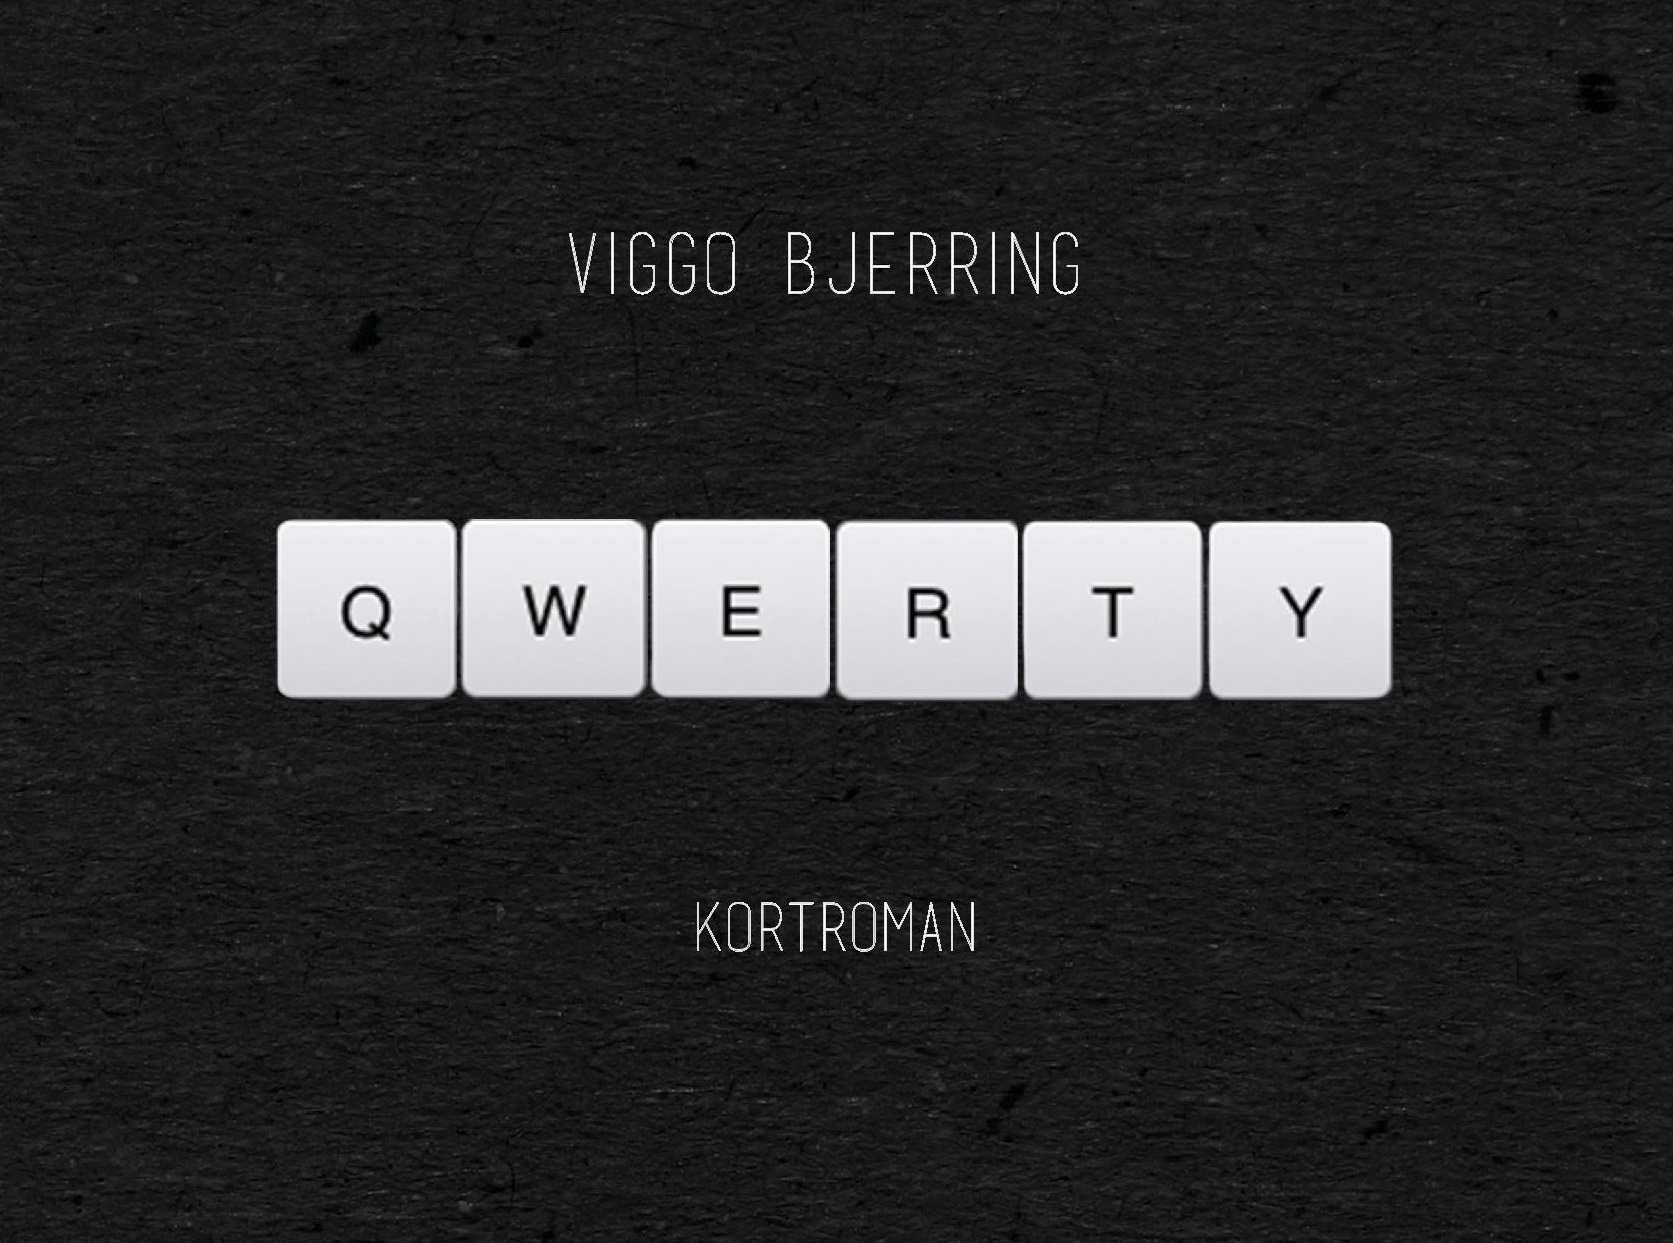 release for qwerty, Viggo Bjerring, qwerty